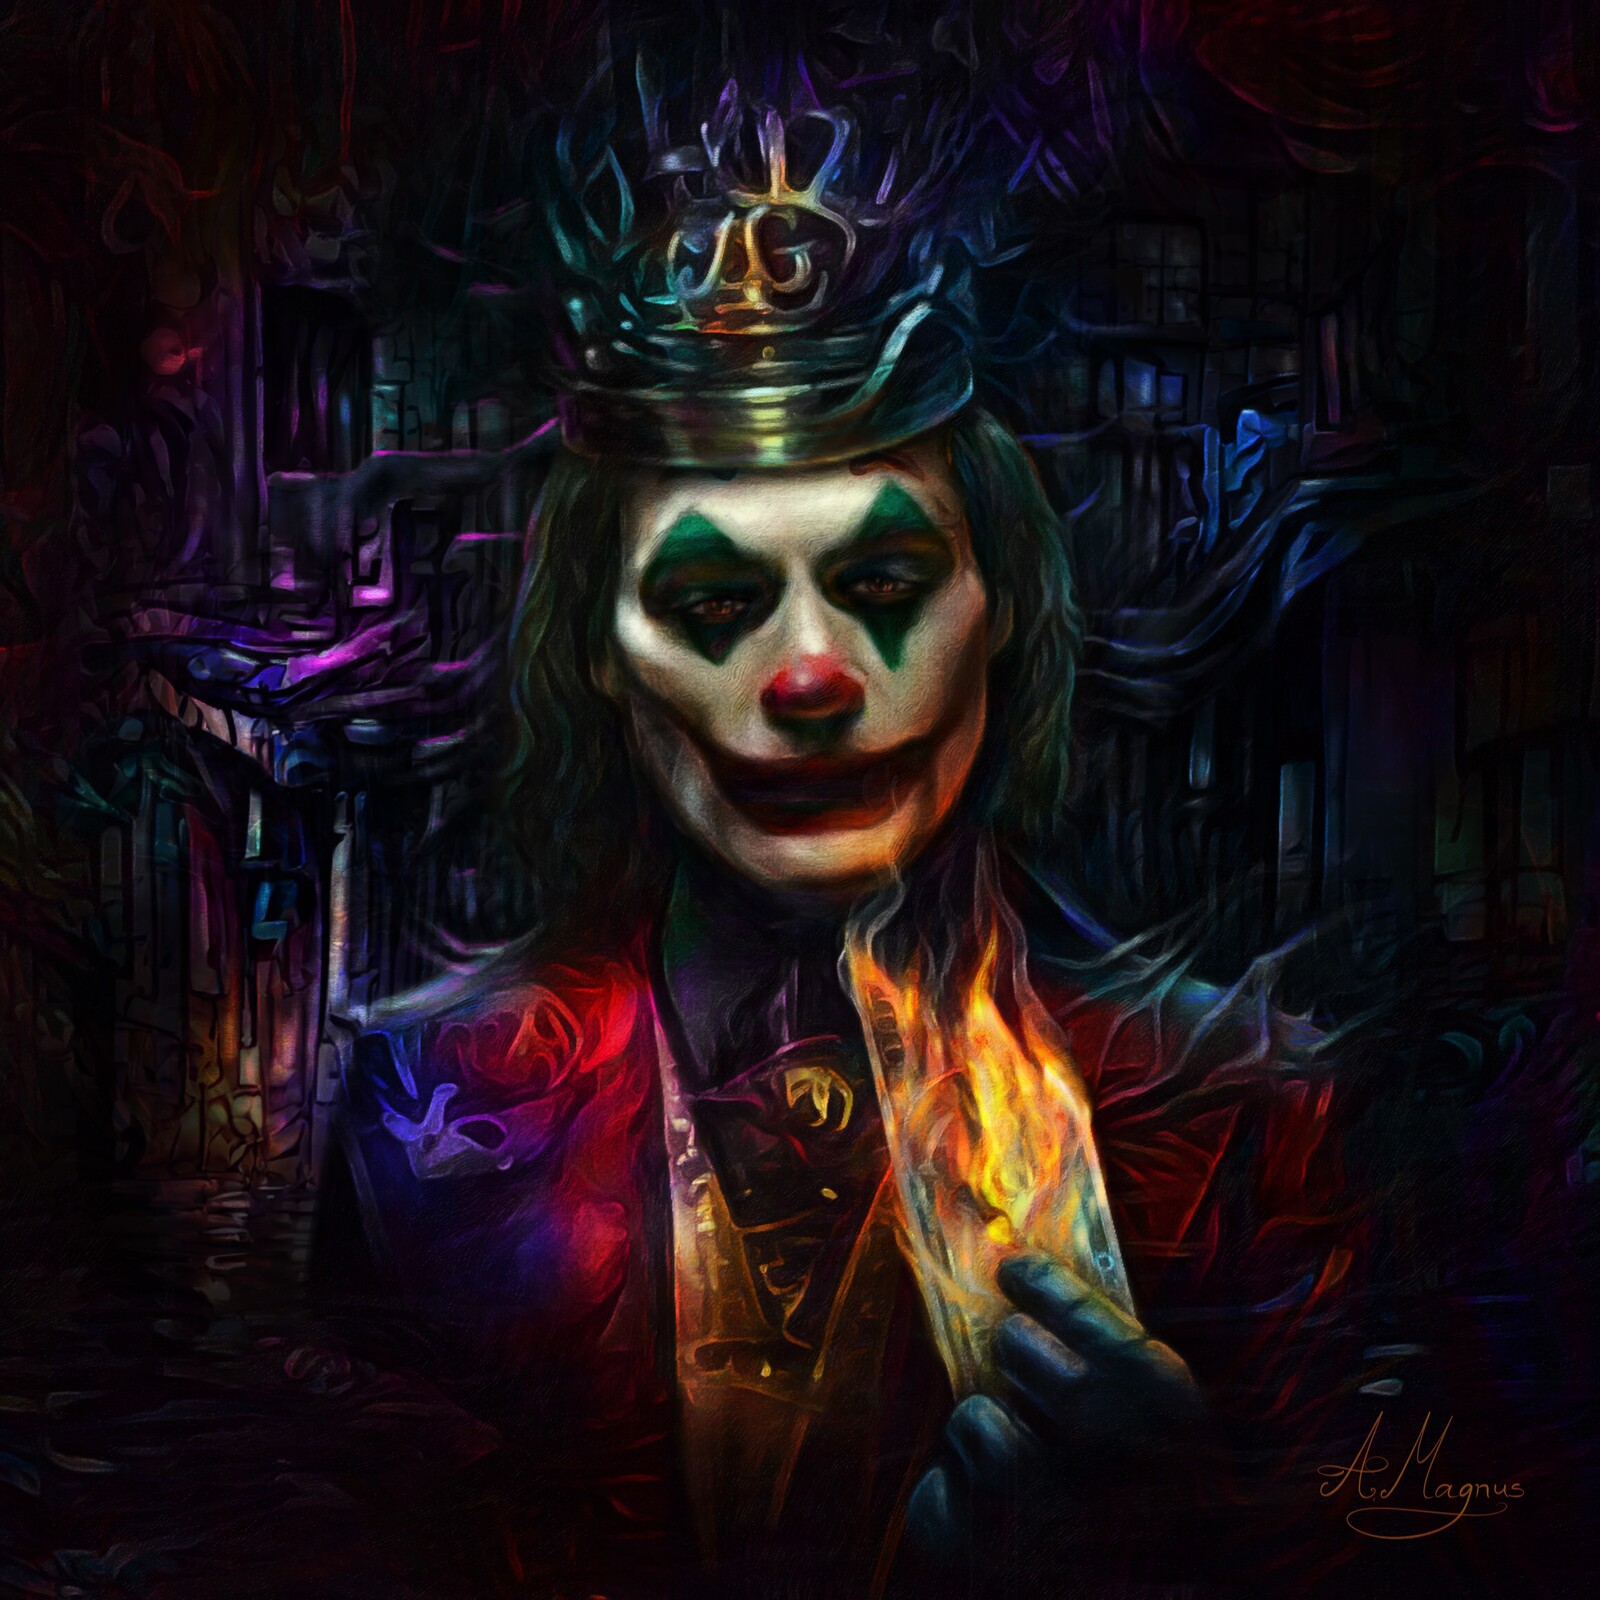 The Joker character from the movie - painting by Aemiliana Magnus